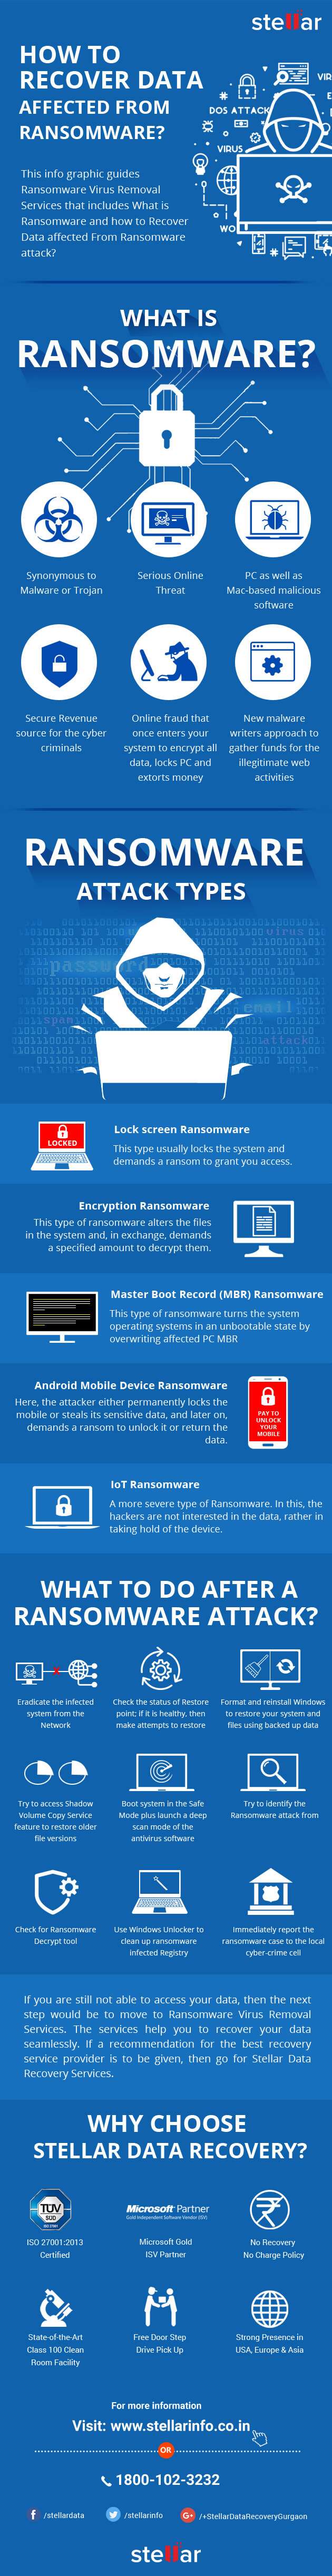 Ransomware Data Recovery infographic